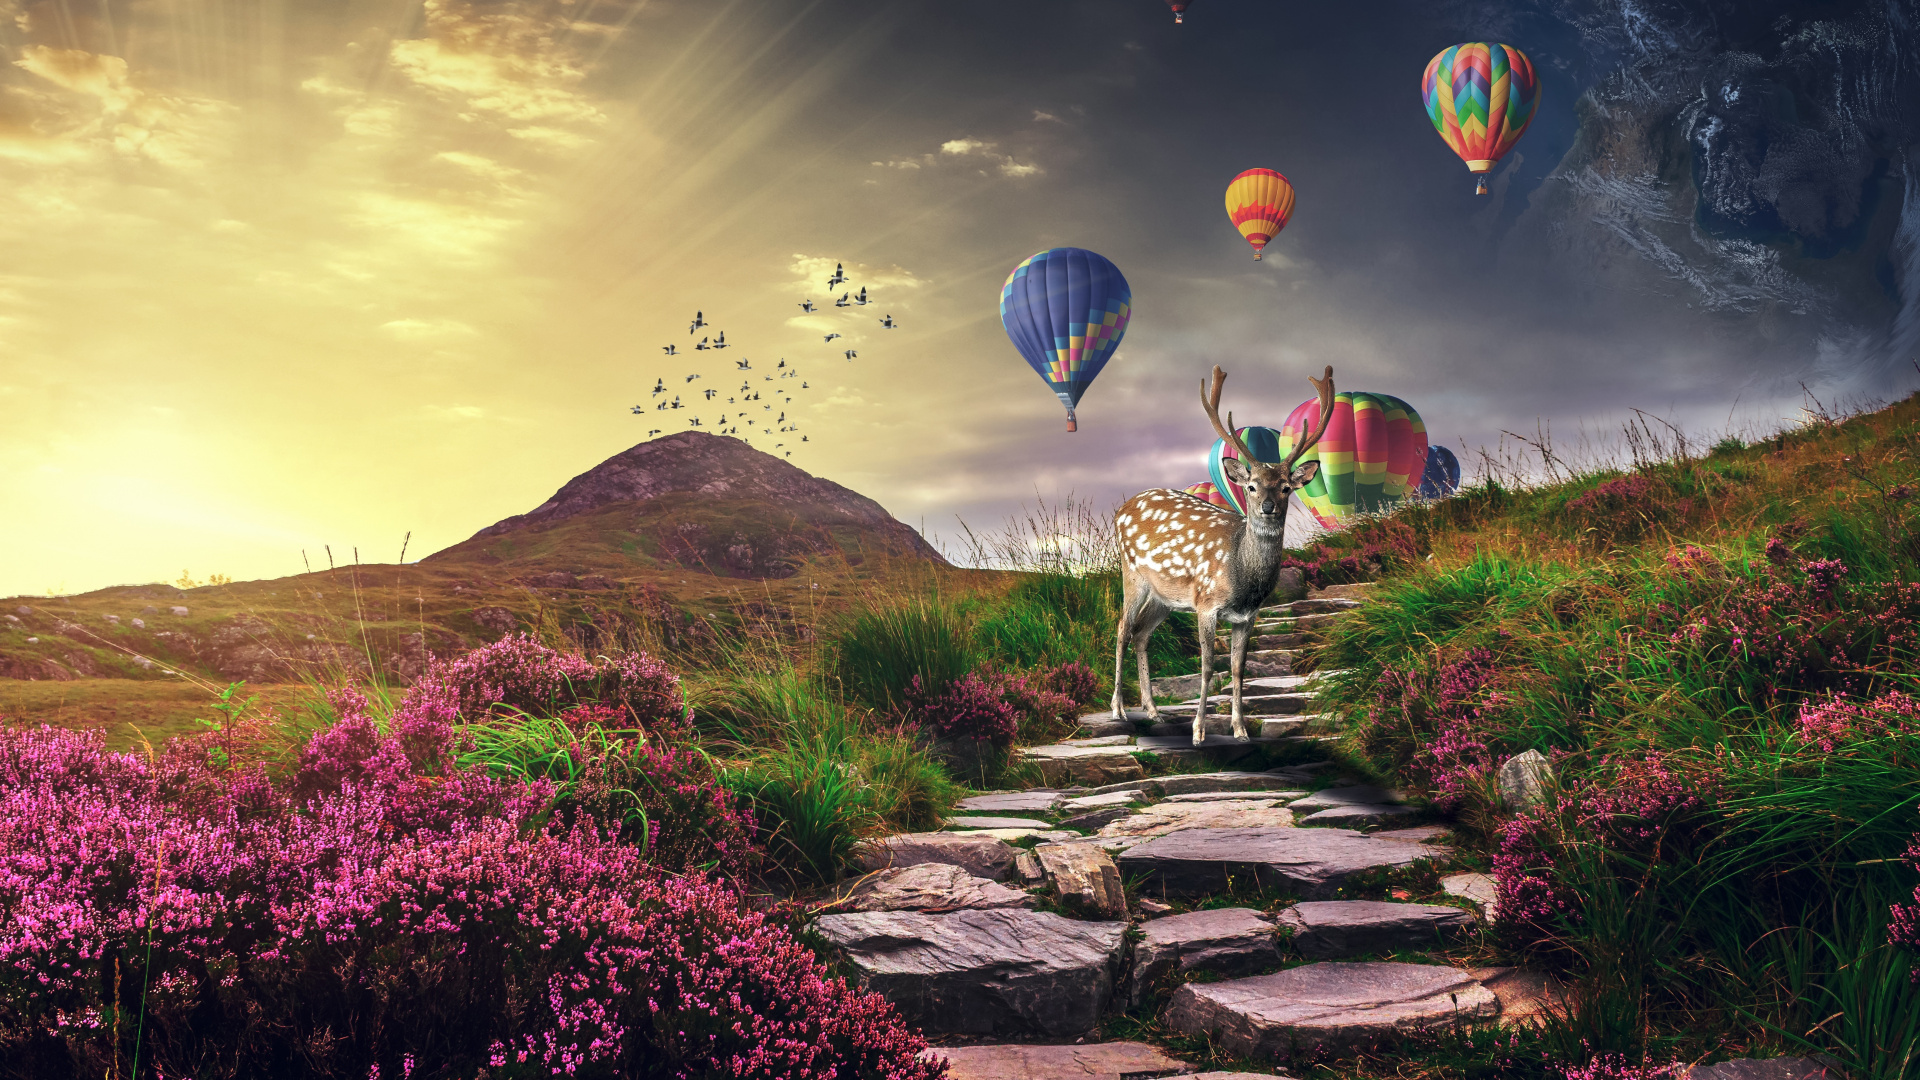 Hot Air Balloons on Sky Above Purple Flower Field. Wallpaper in 1920x1080 Resolution